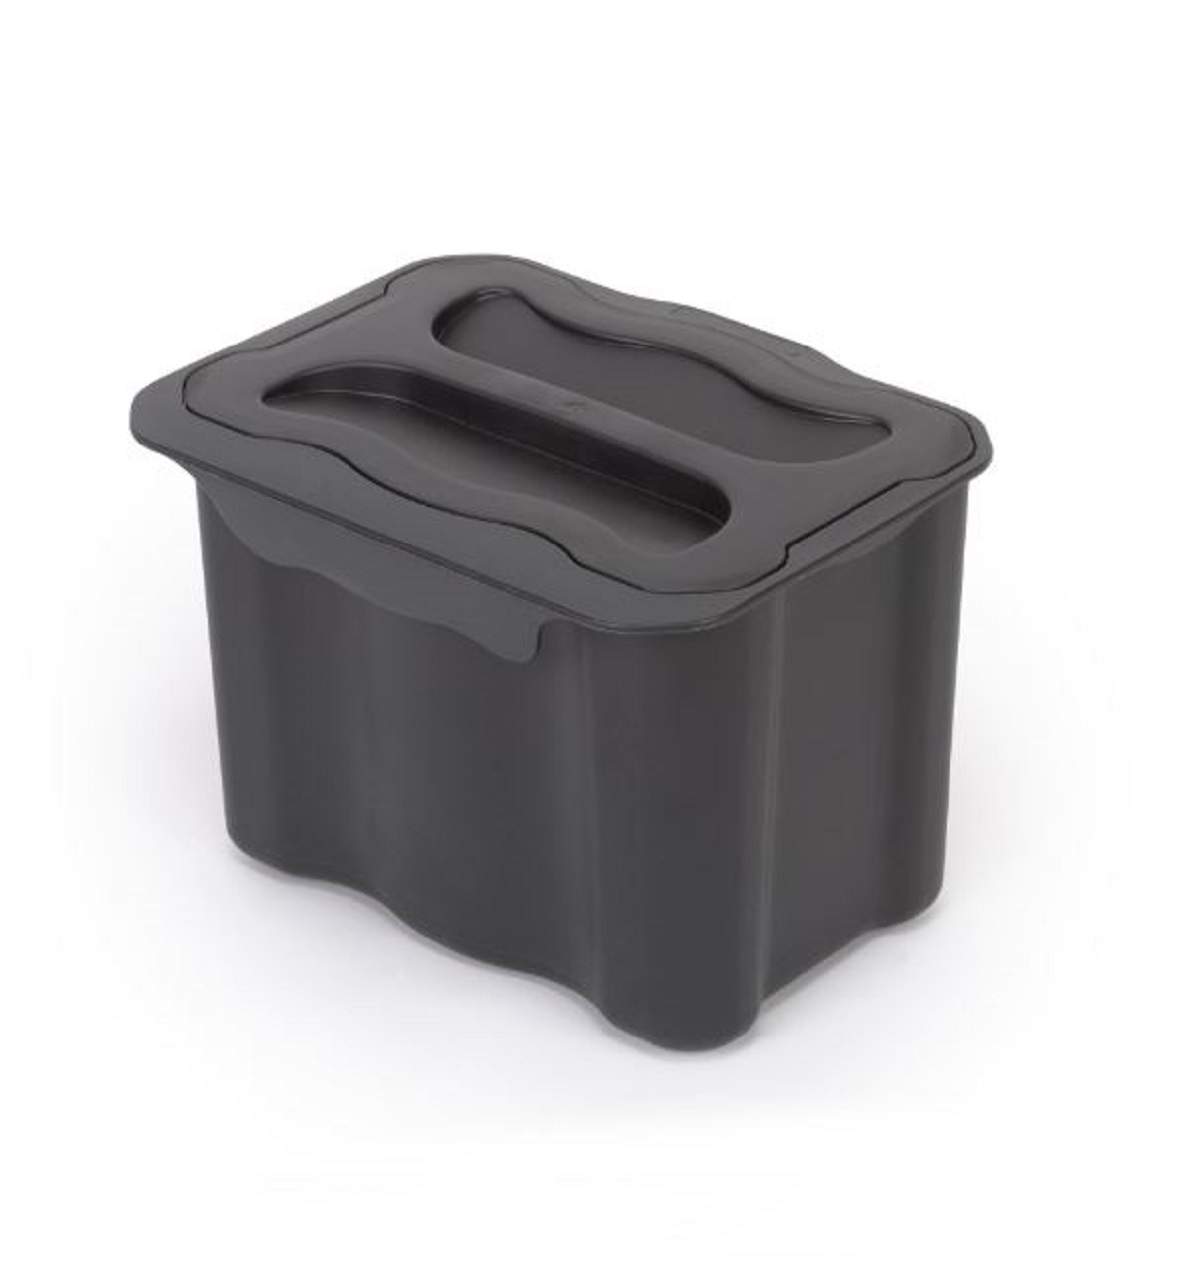 Auxiliary plastic kitchen recycling garbage can, 5 liters, anthracite grey